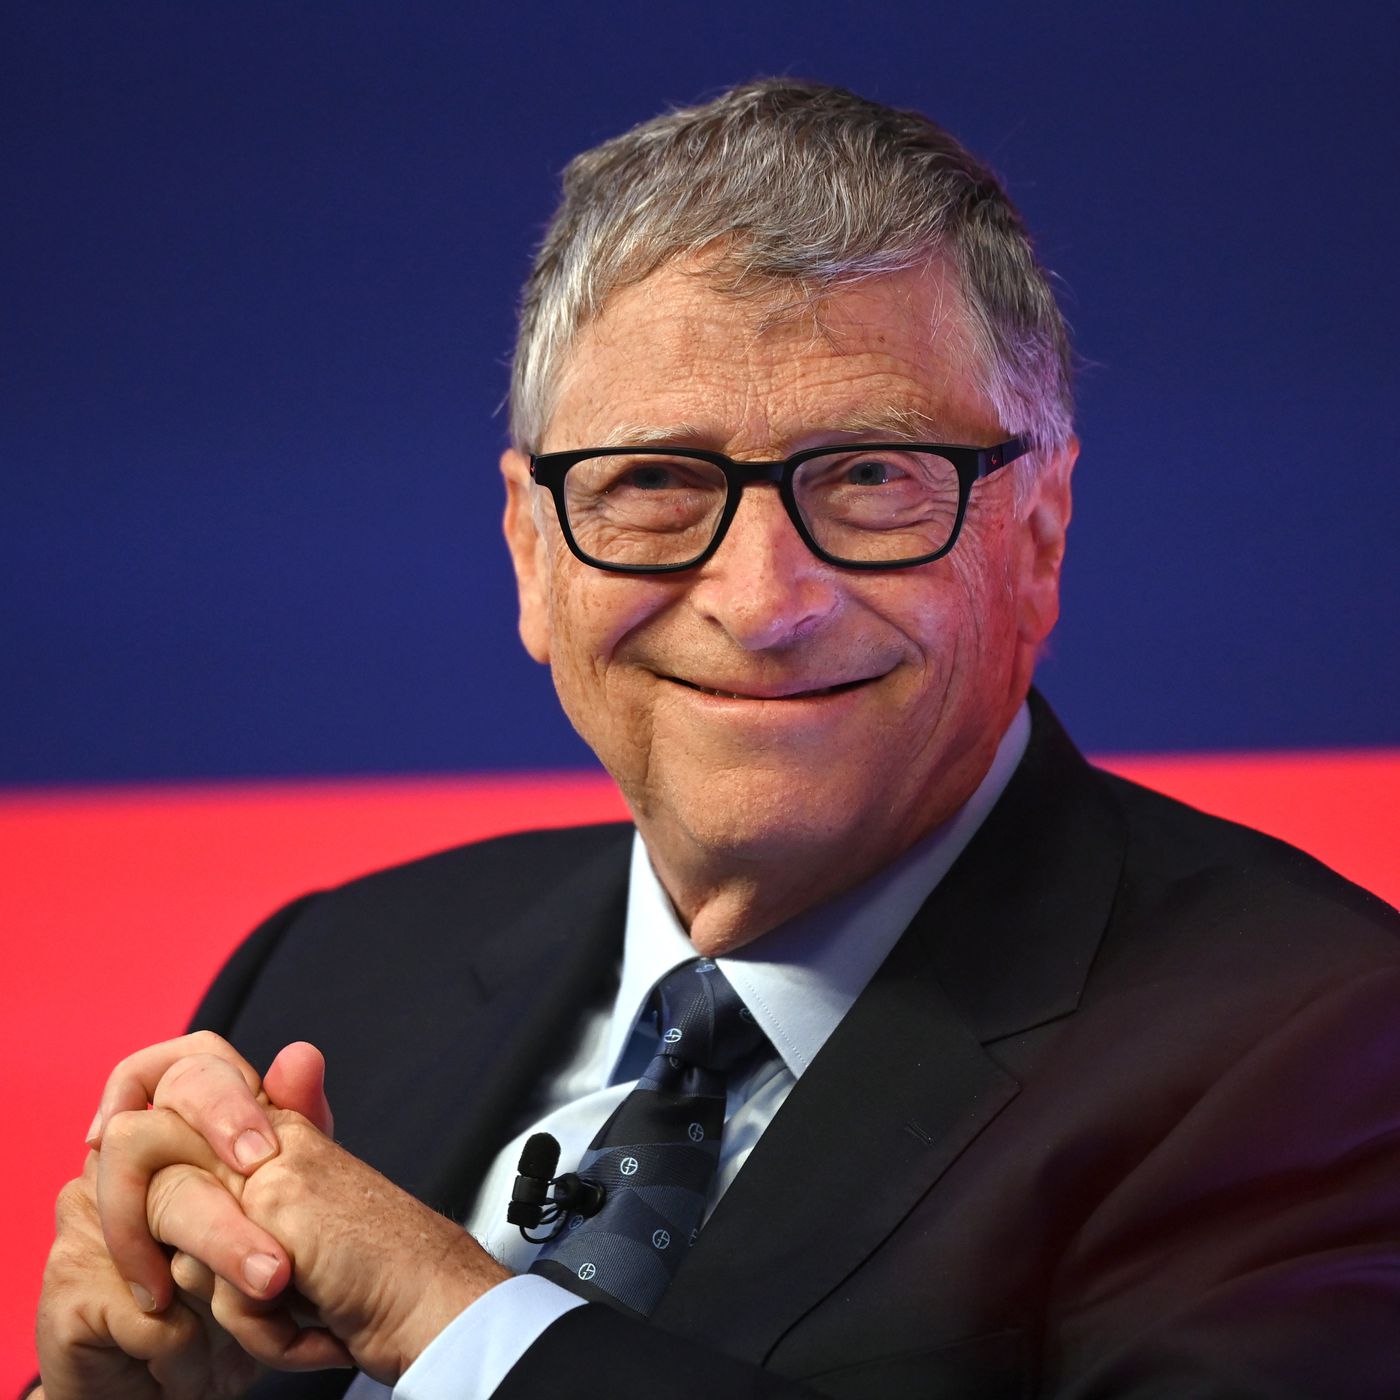 Interview: Bill Gates talks with Recode about his new book ...